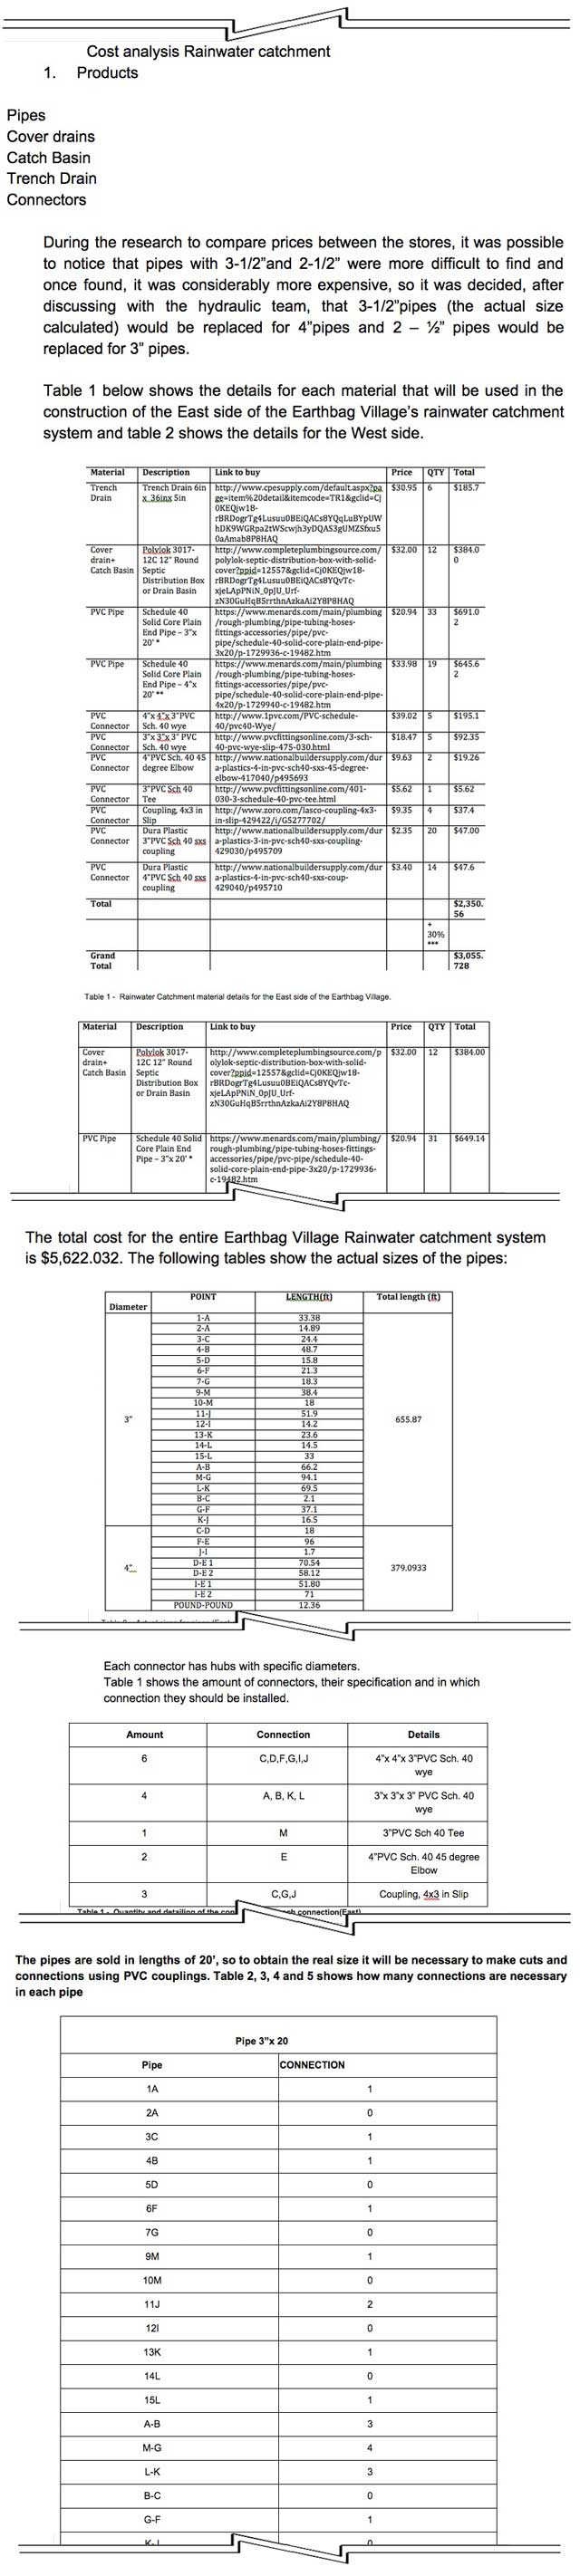 cost analysis for the Rainwater Catchment System that will be constructed for the Earthbag Village (Pod 1)., One Community